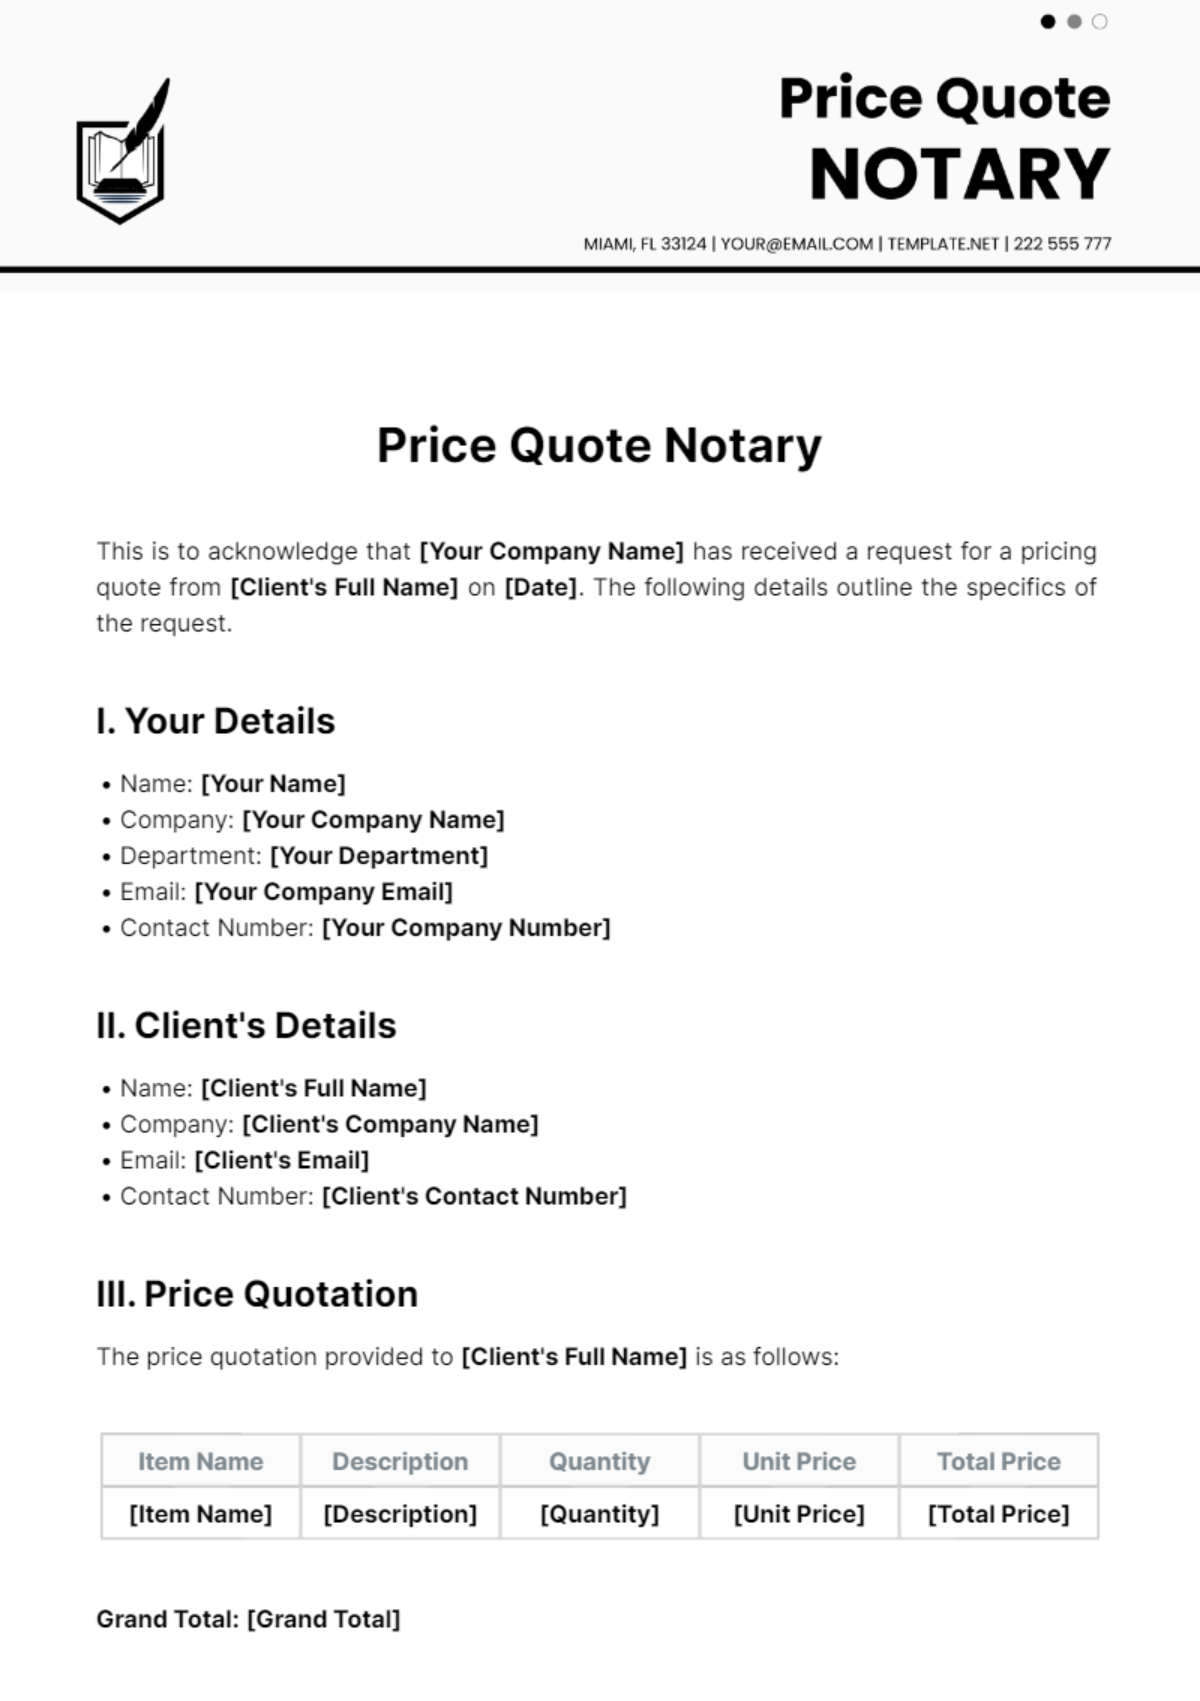 Price Quote Notary Template